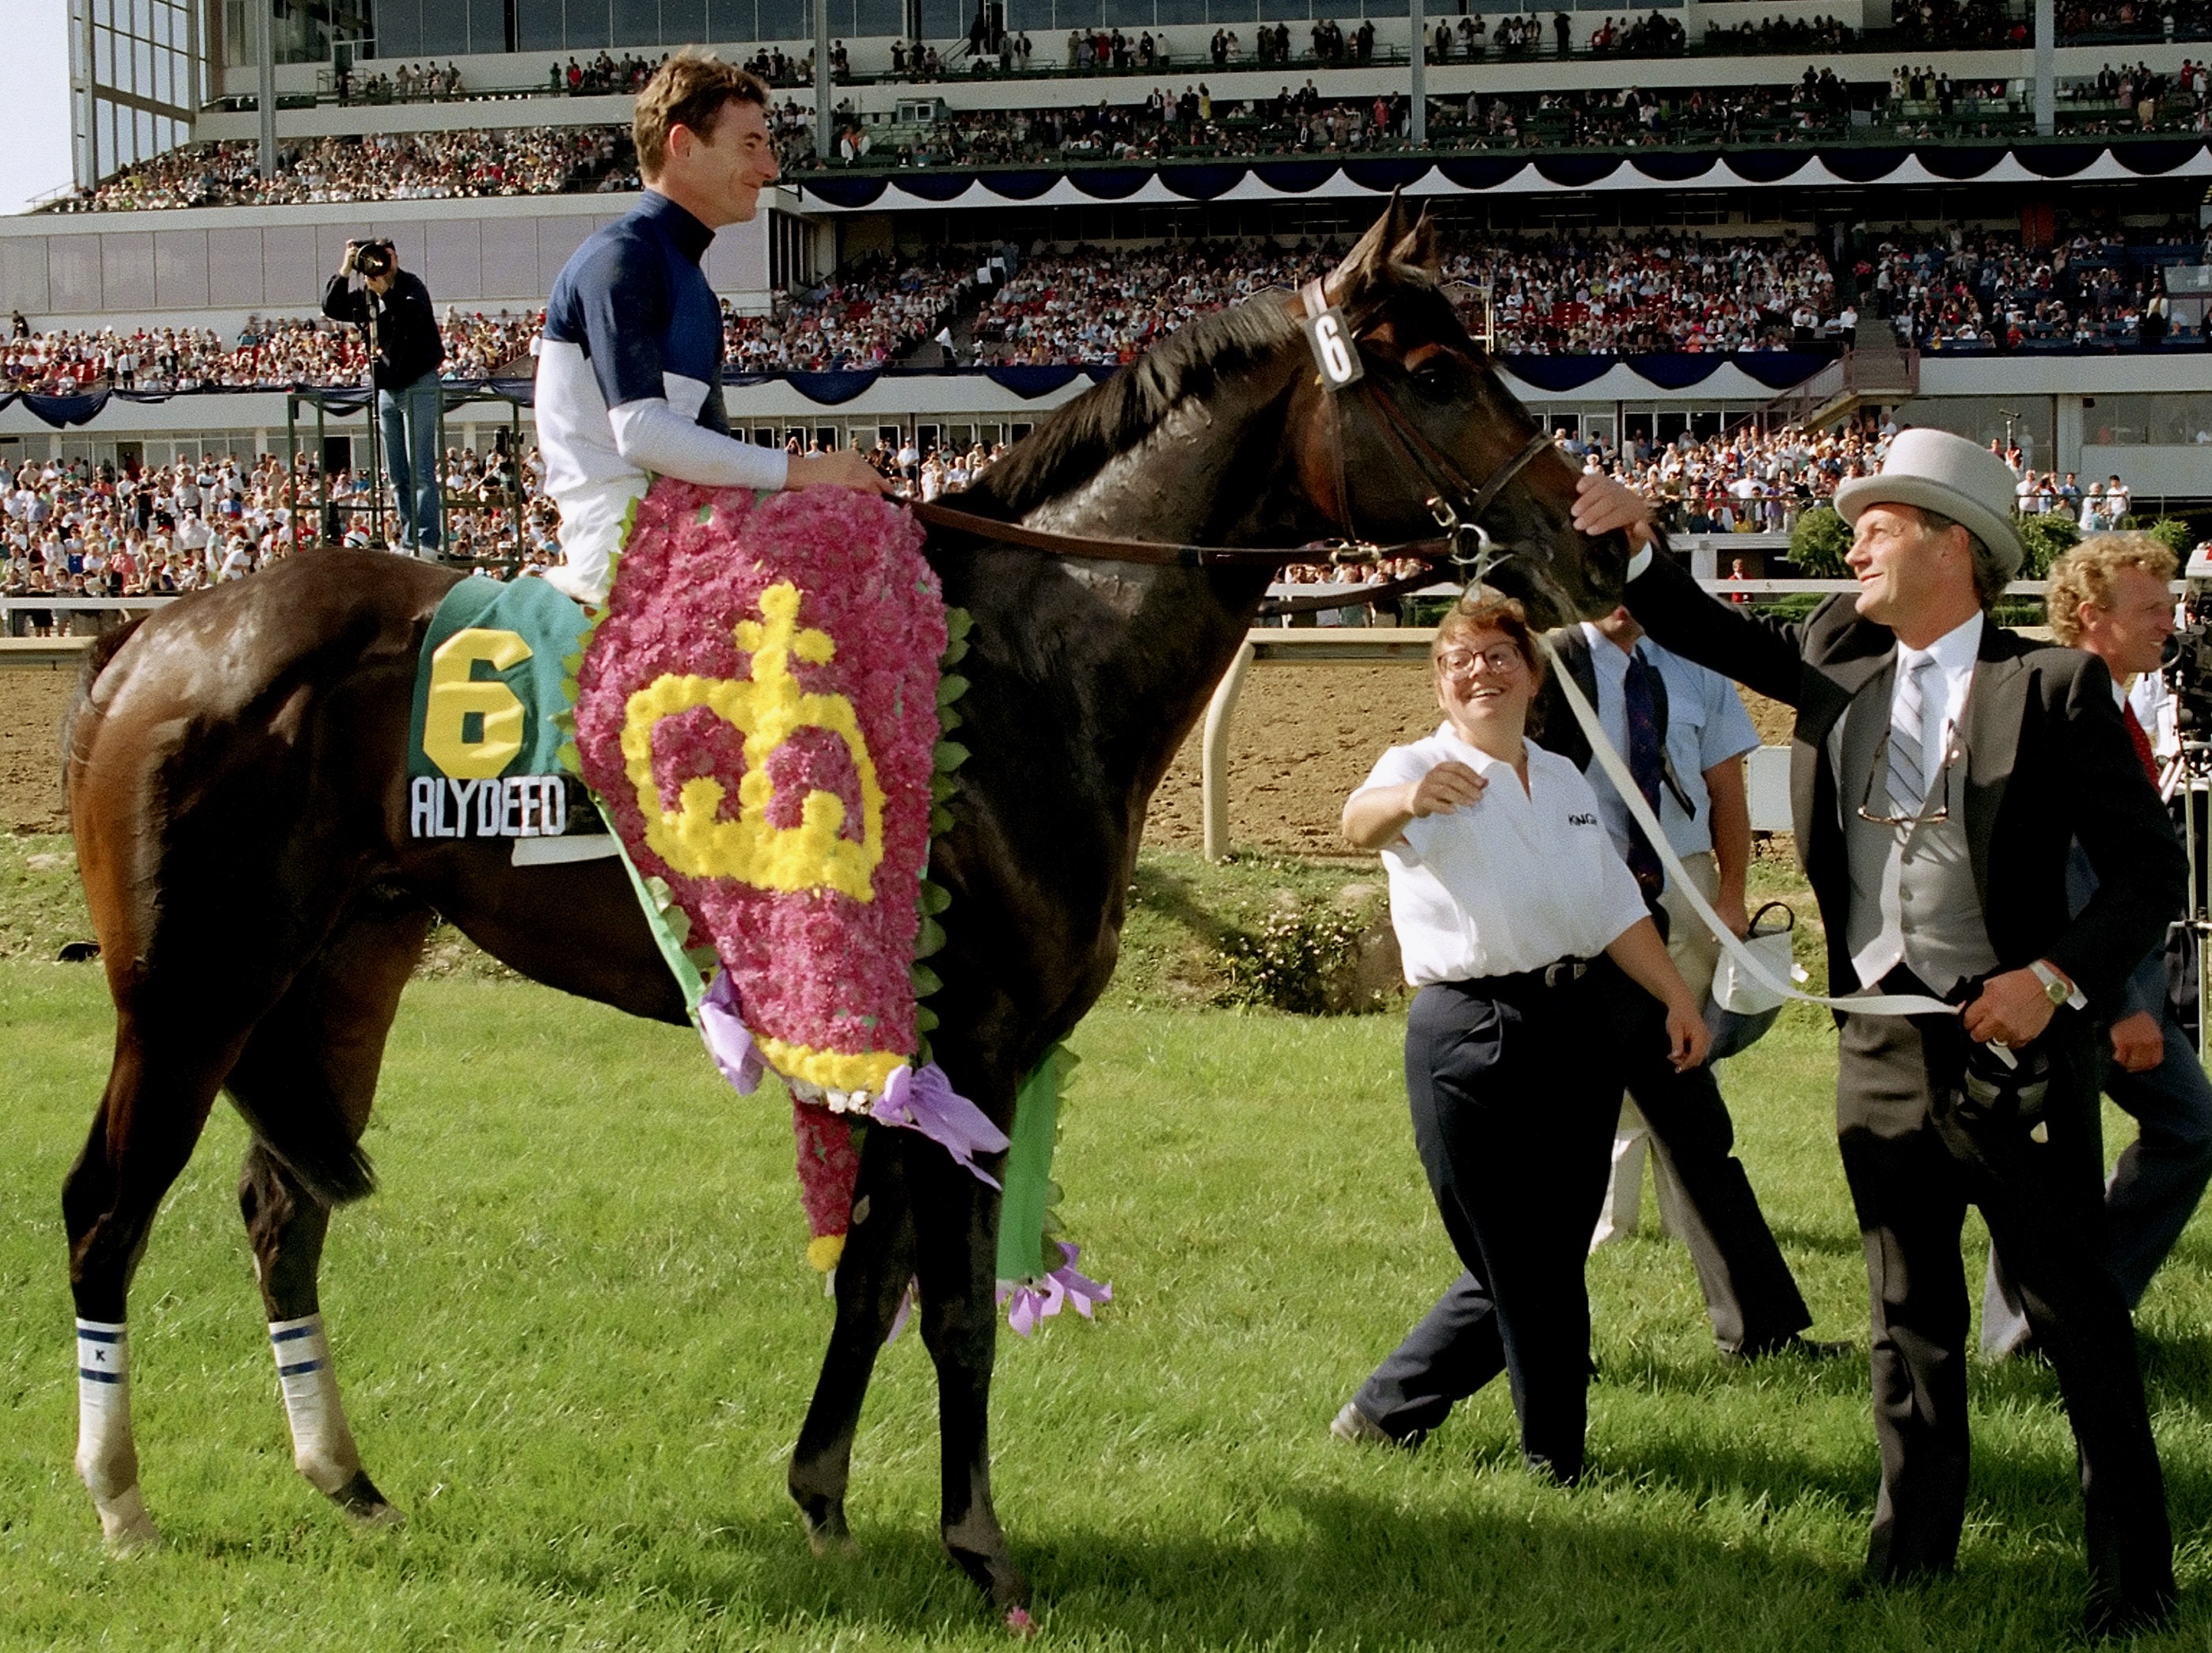 Roger Attfield and Alydeed (Craig Perret up) in the winner's circle for the 1992 Queen's Plate at Woodbine (Woodbine Photo)